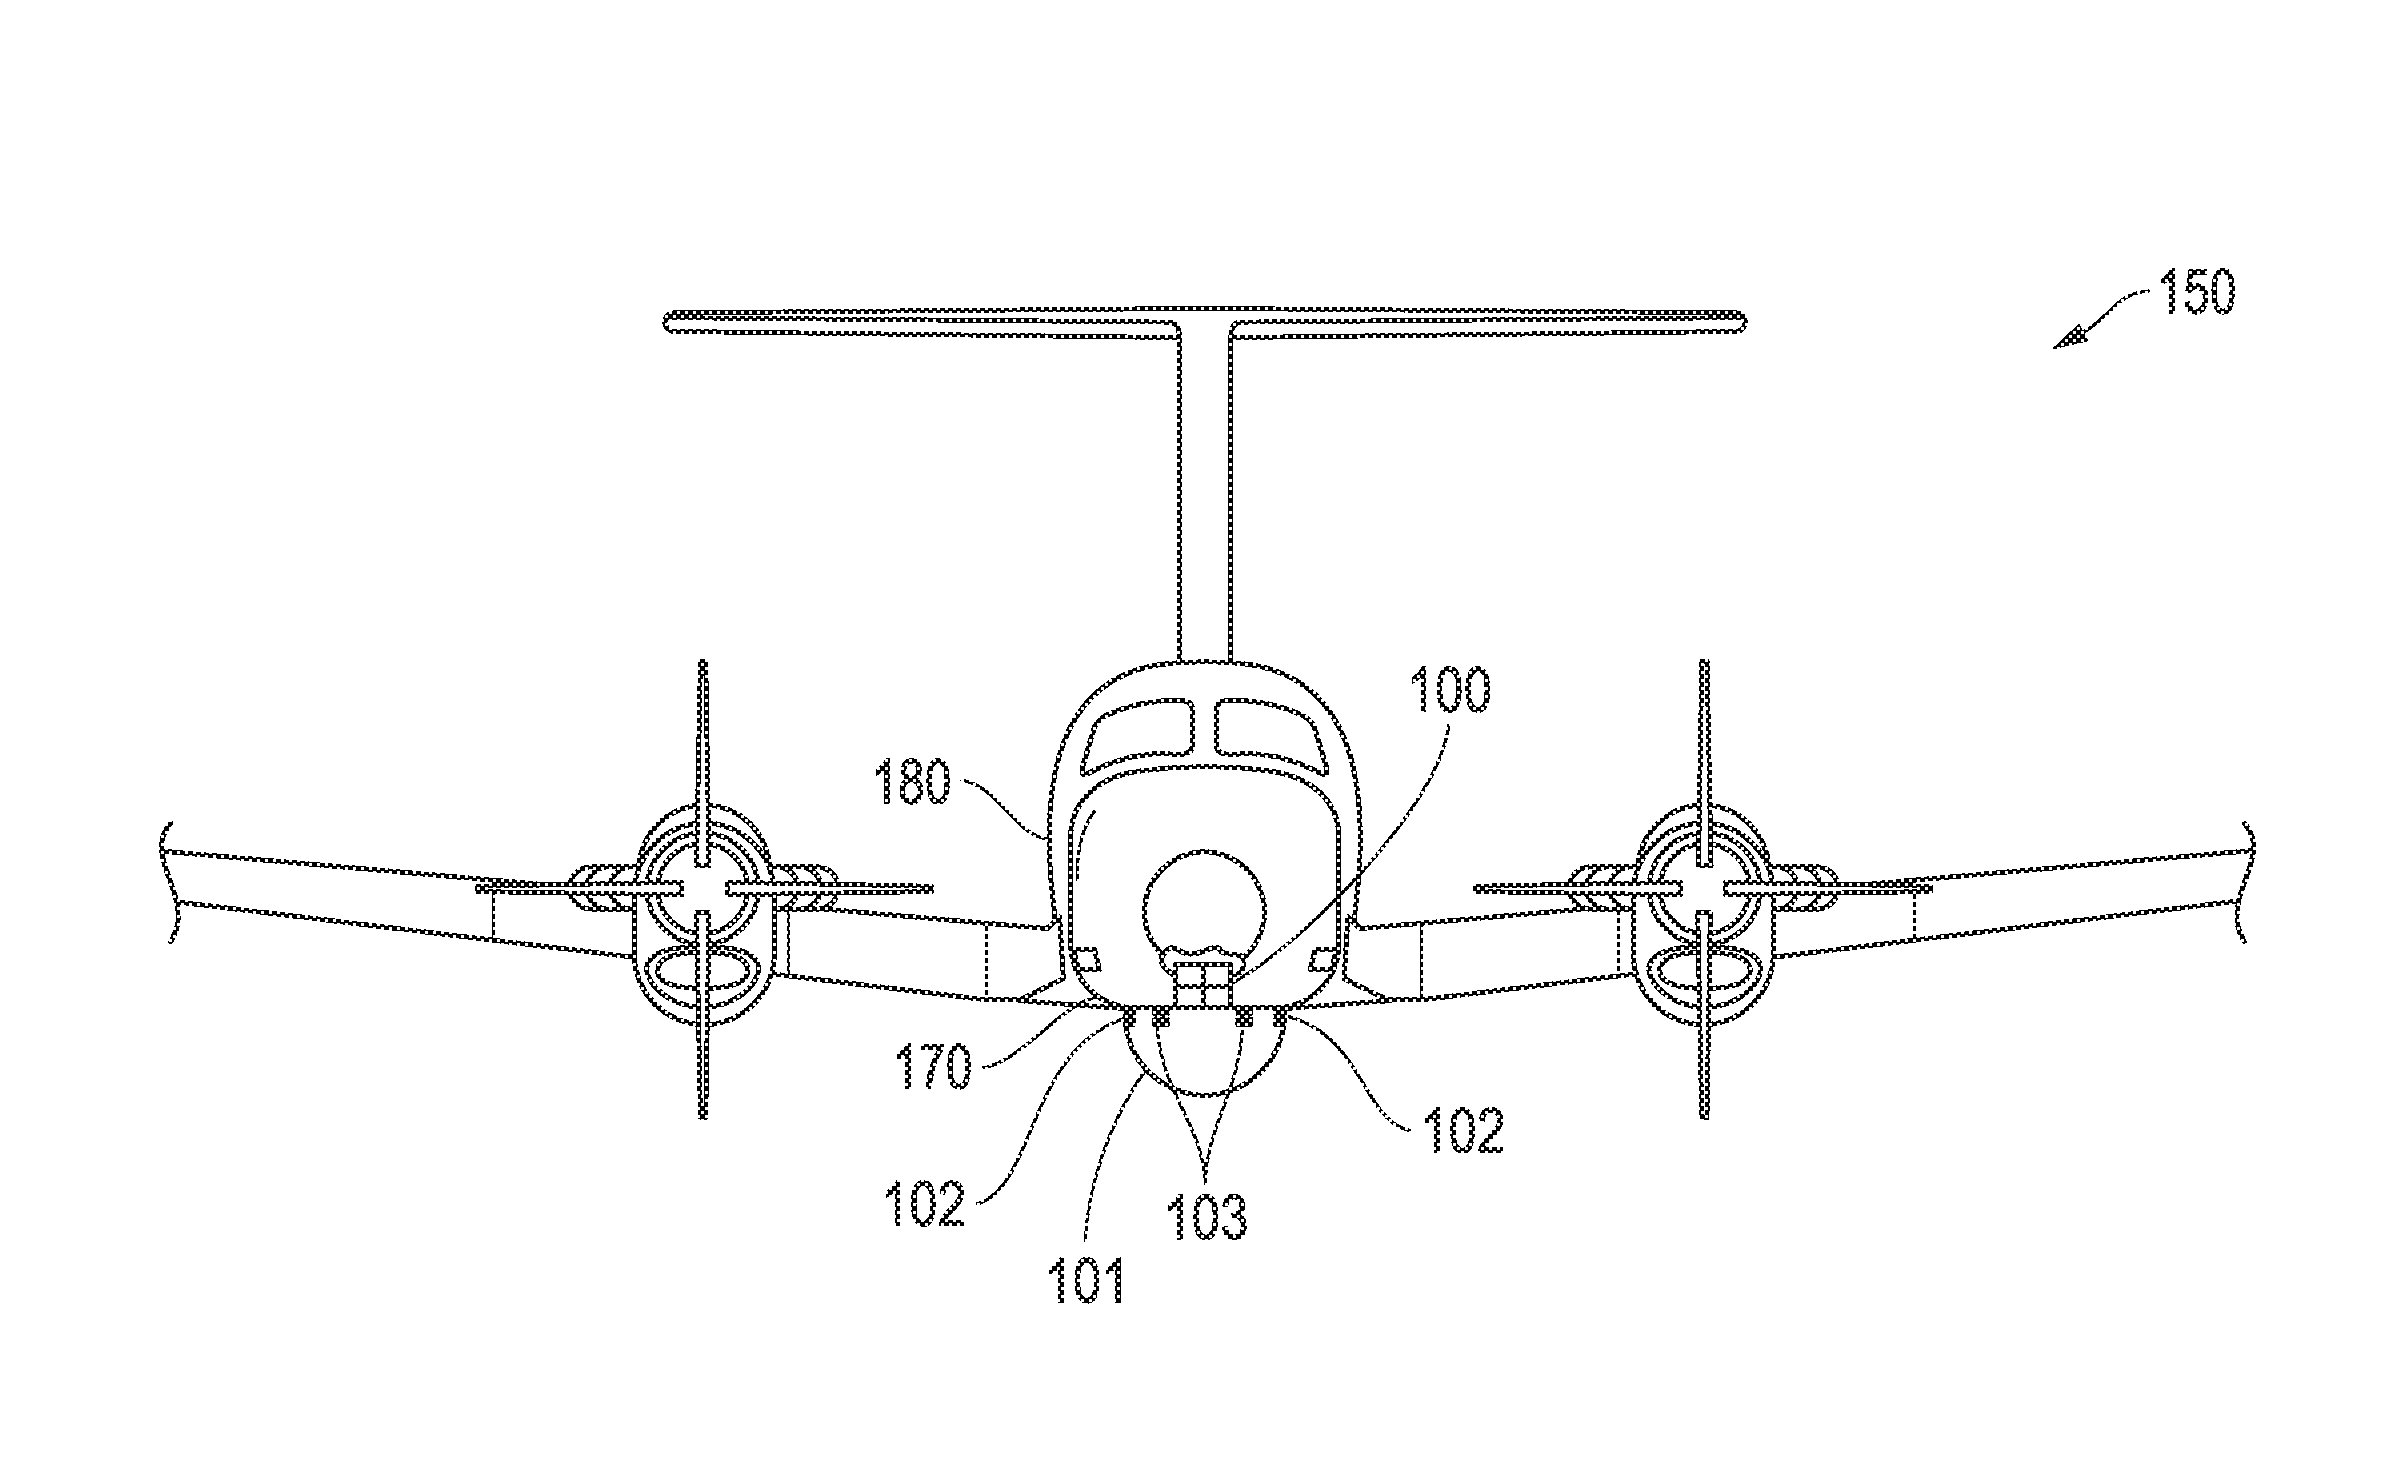 Reconfigurable Payload Systems (RPS) With Operational Load Envelopes For Aircraft And Methods Related Thereto